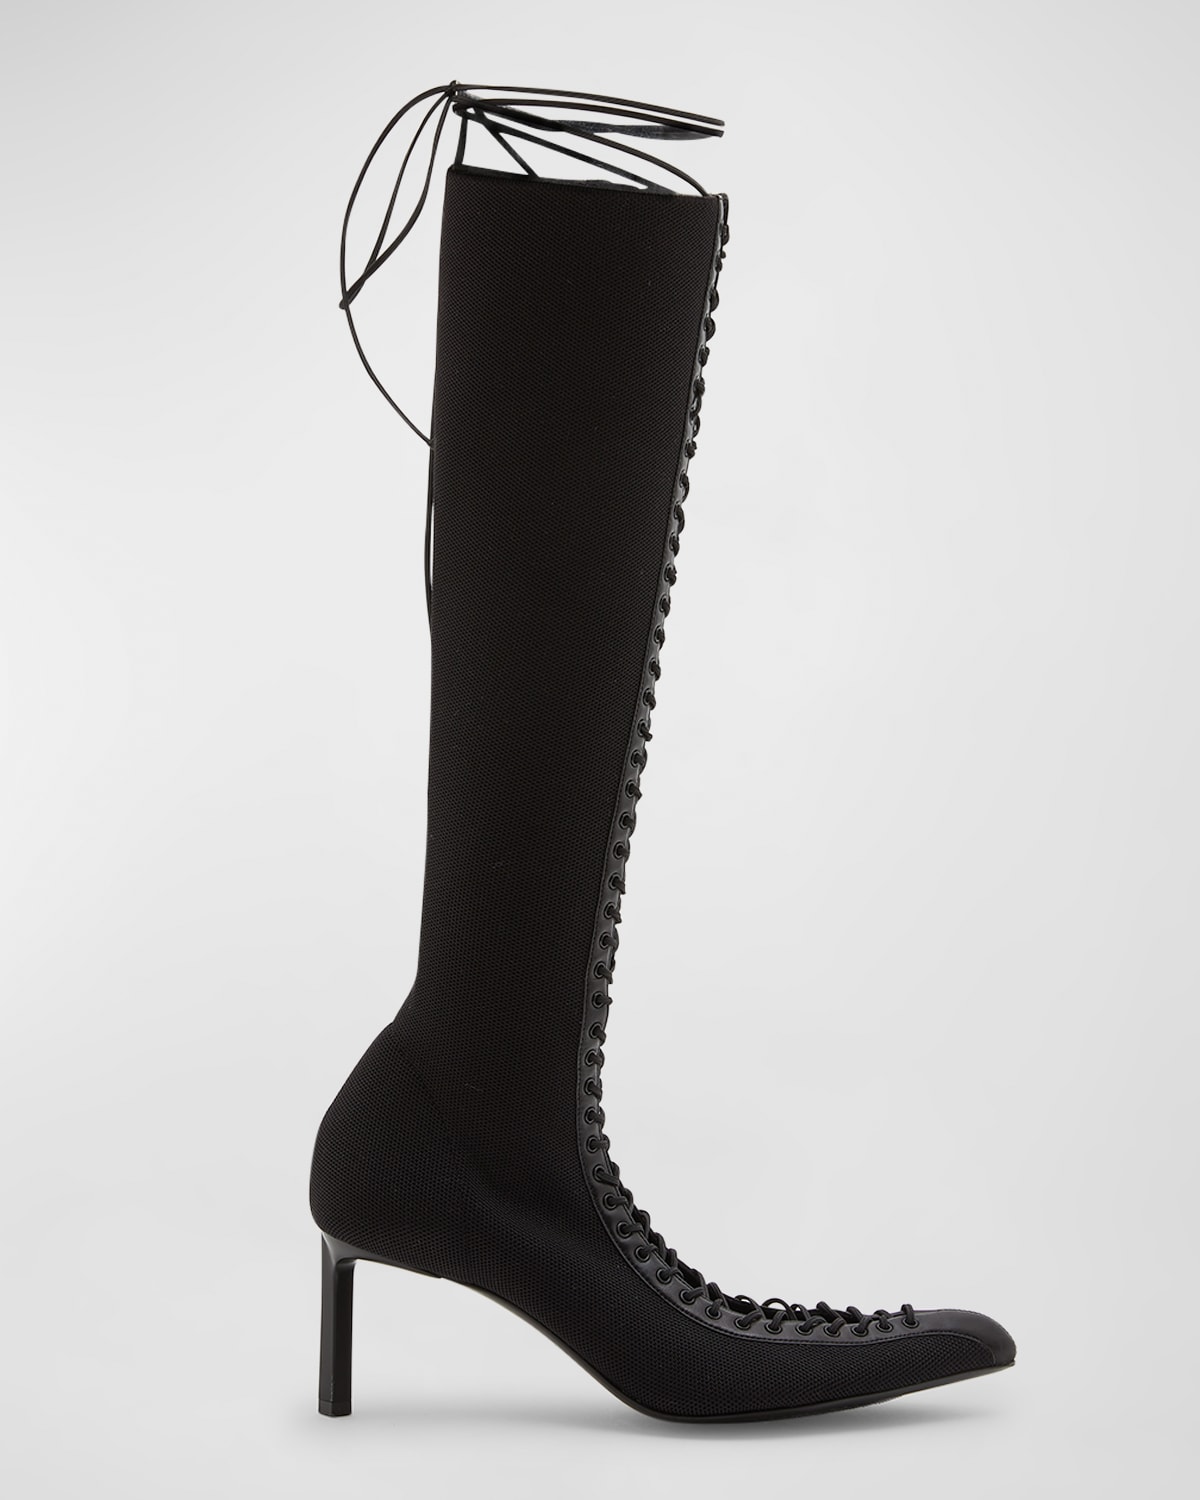 Givenchy Boots | Neiman Marcus